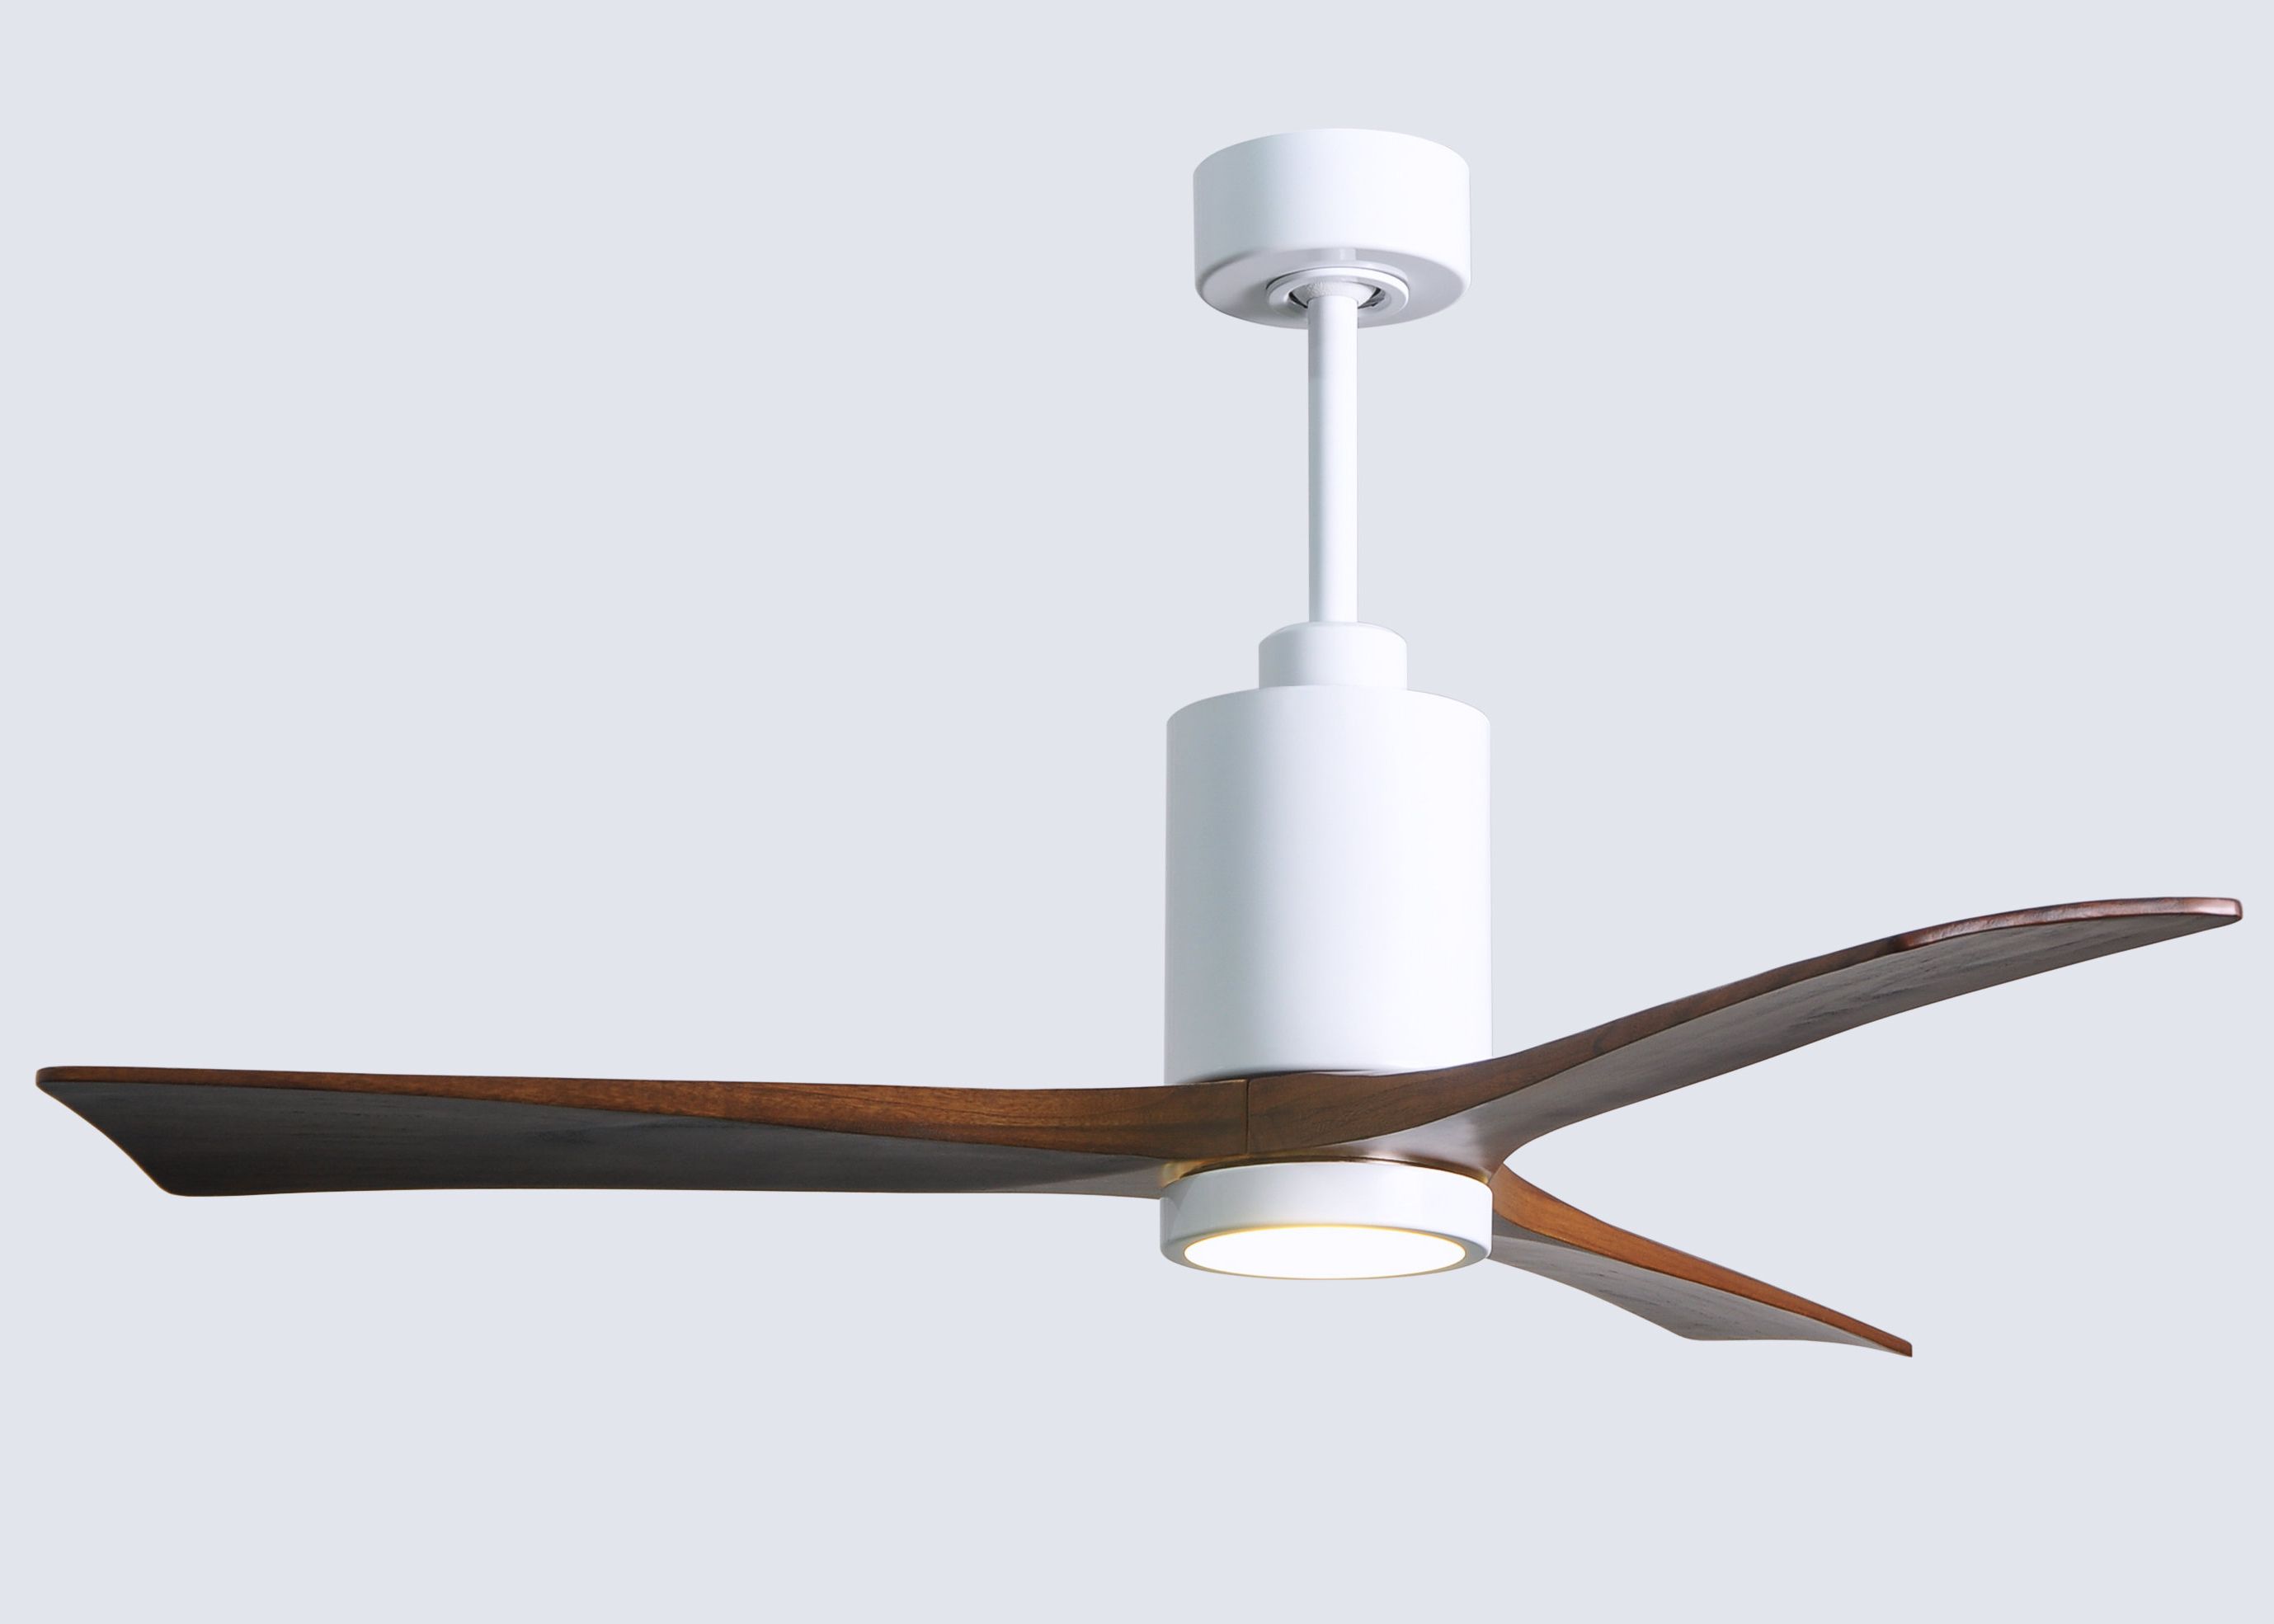 52" Menik 3 Blade Ceiling Fan With Wall Remote Pertaining To Fashionable Troxler 3 Blade Ceiling Fans (View 12 of 20)